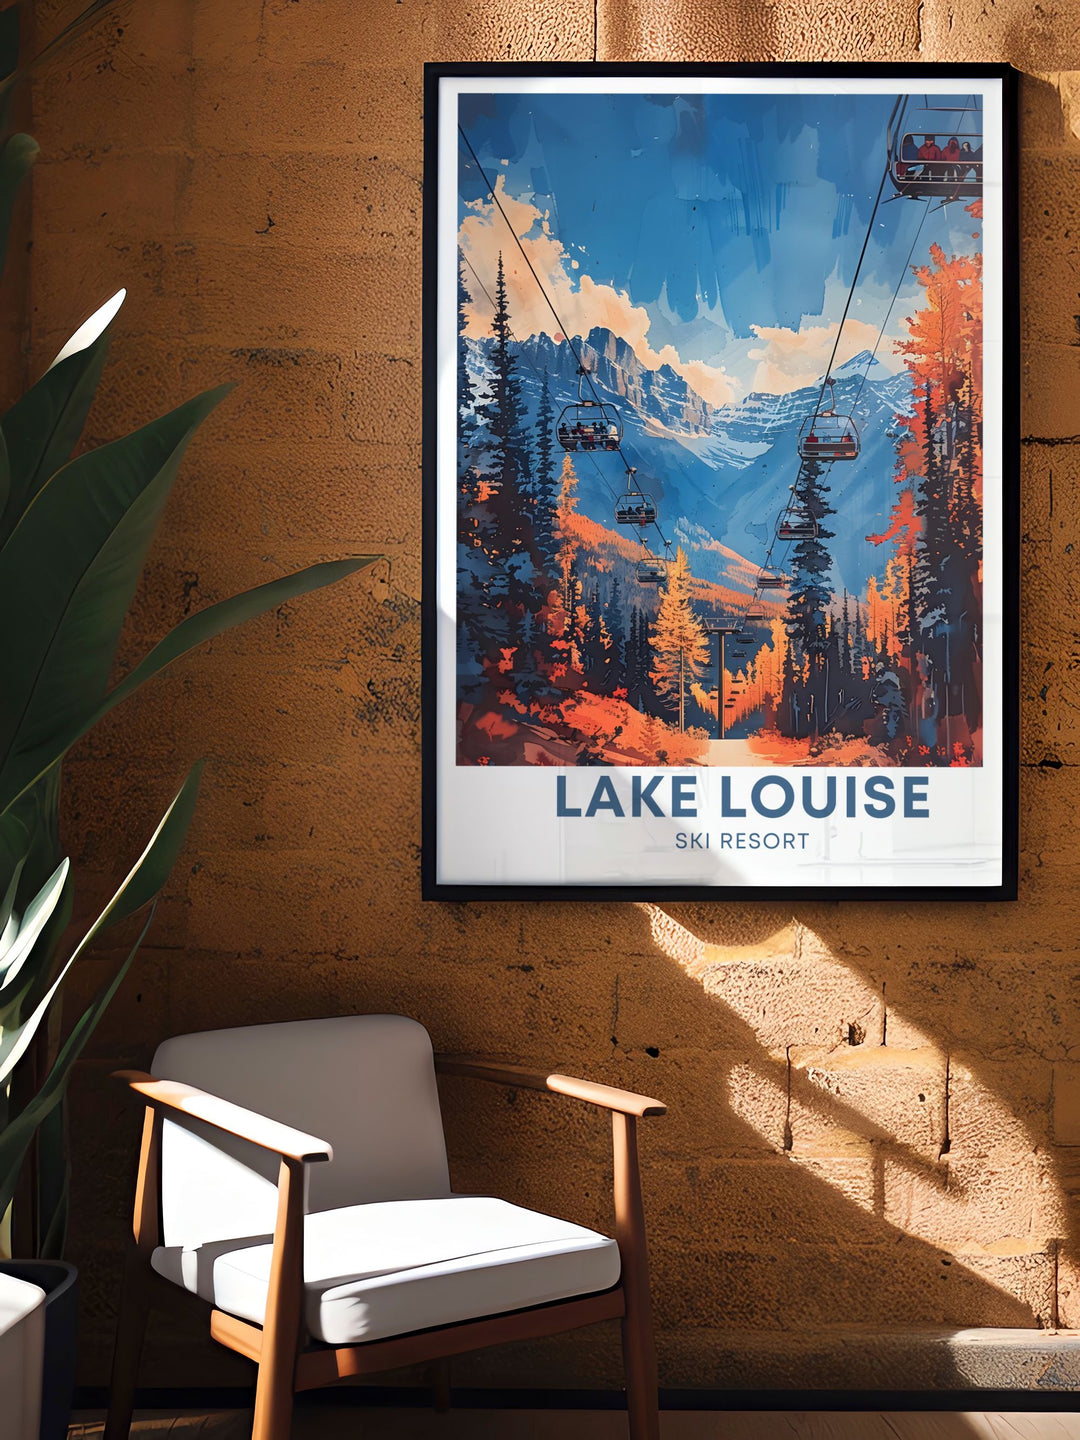 Lake Louise, with its turquoise waters and stunning mountain backdrop, is beautifully illustrated in this poster. Known as the "Jewel of the Rockies," its a must see within Banff National Park and a serene addition to any nature lovers decor.